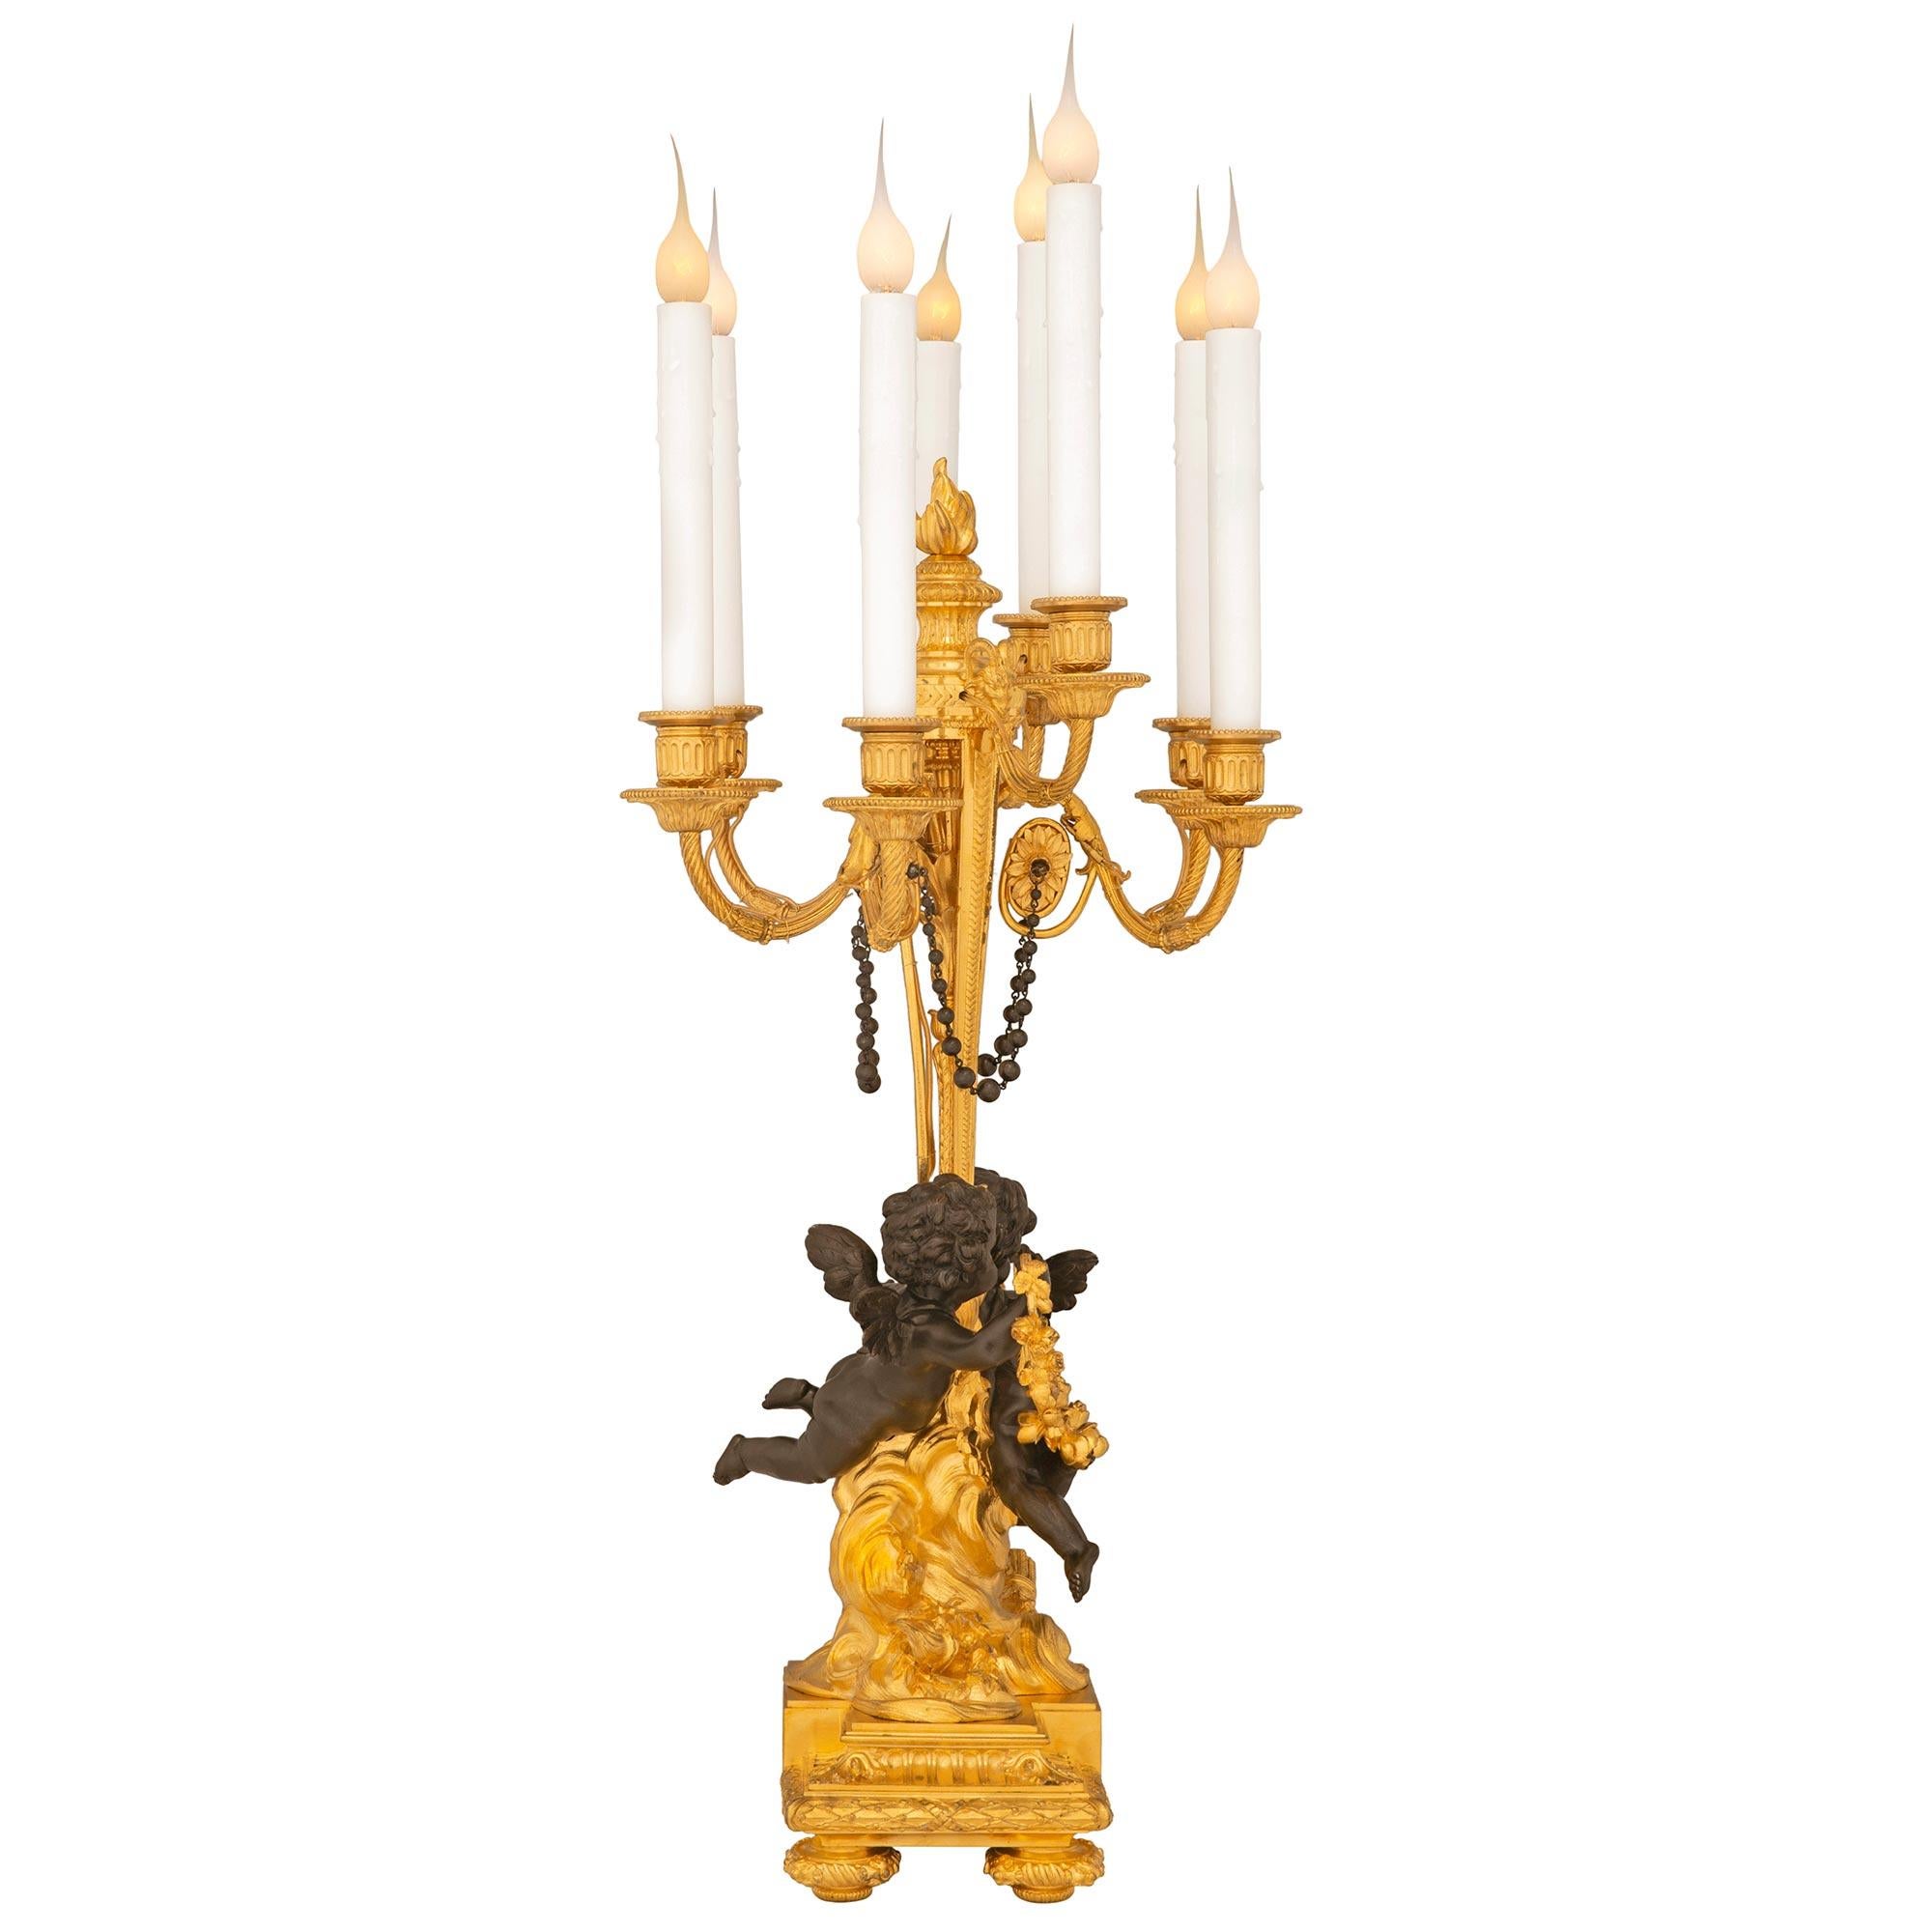 Patinated True Pair of French 19th Century Belle Époque Period Ormolu Candelabra Lamps For Sale